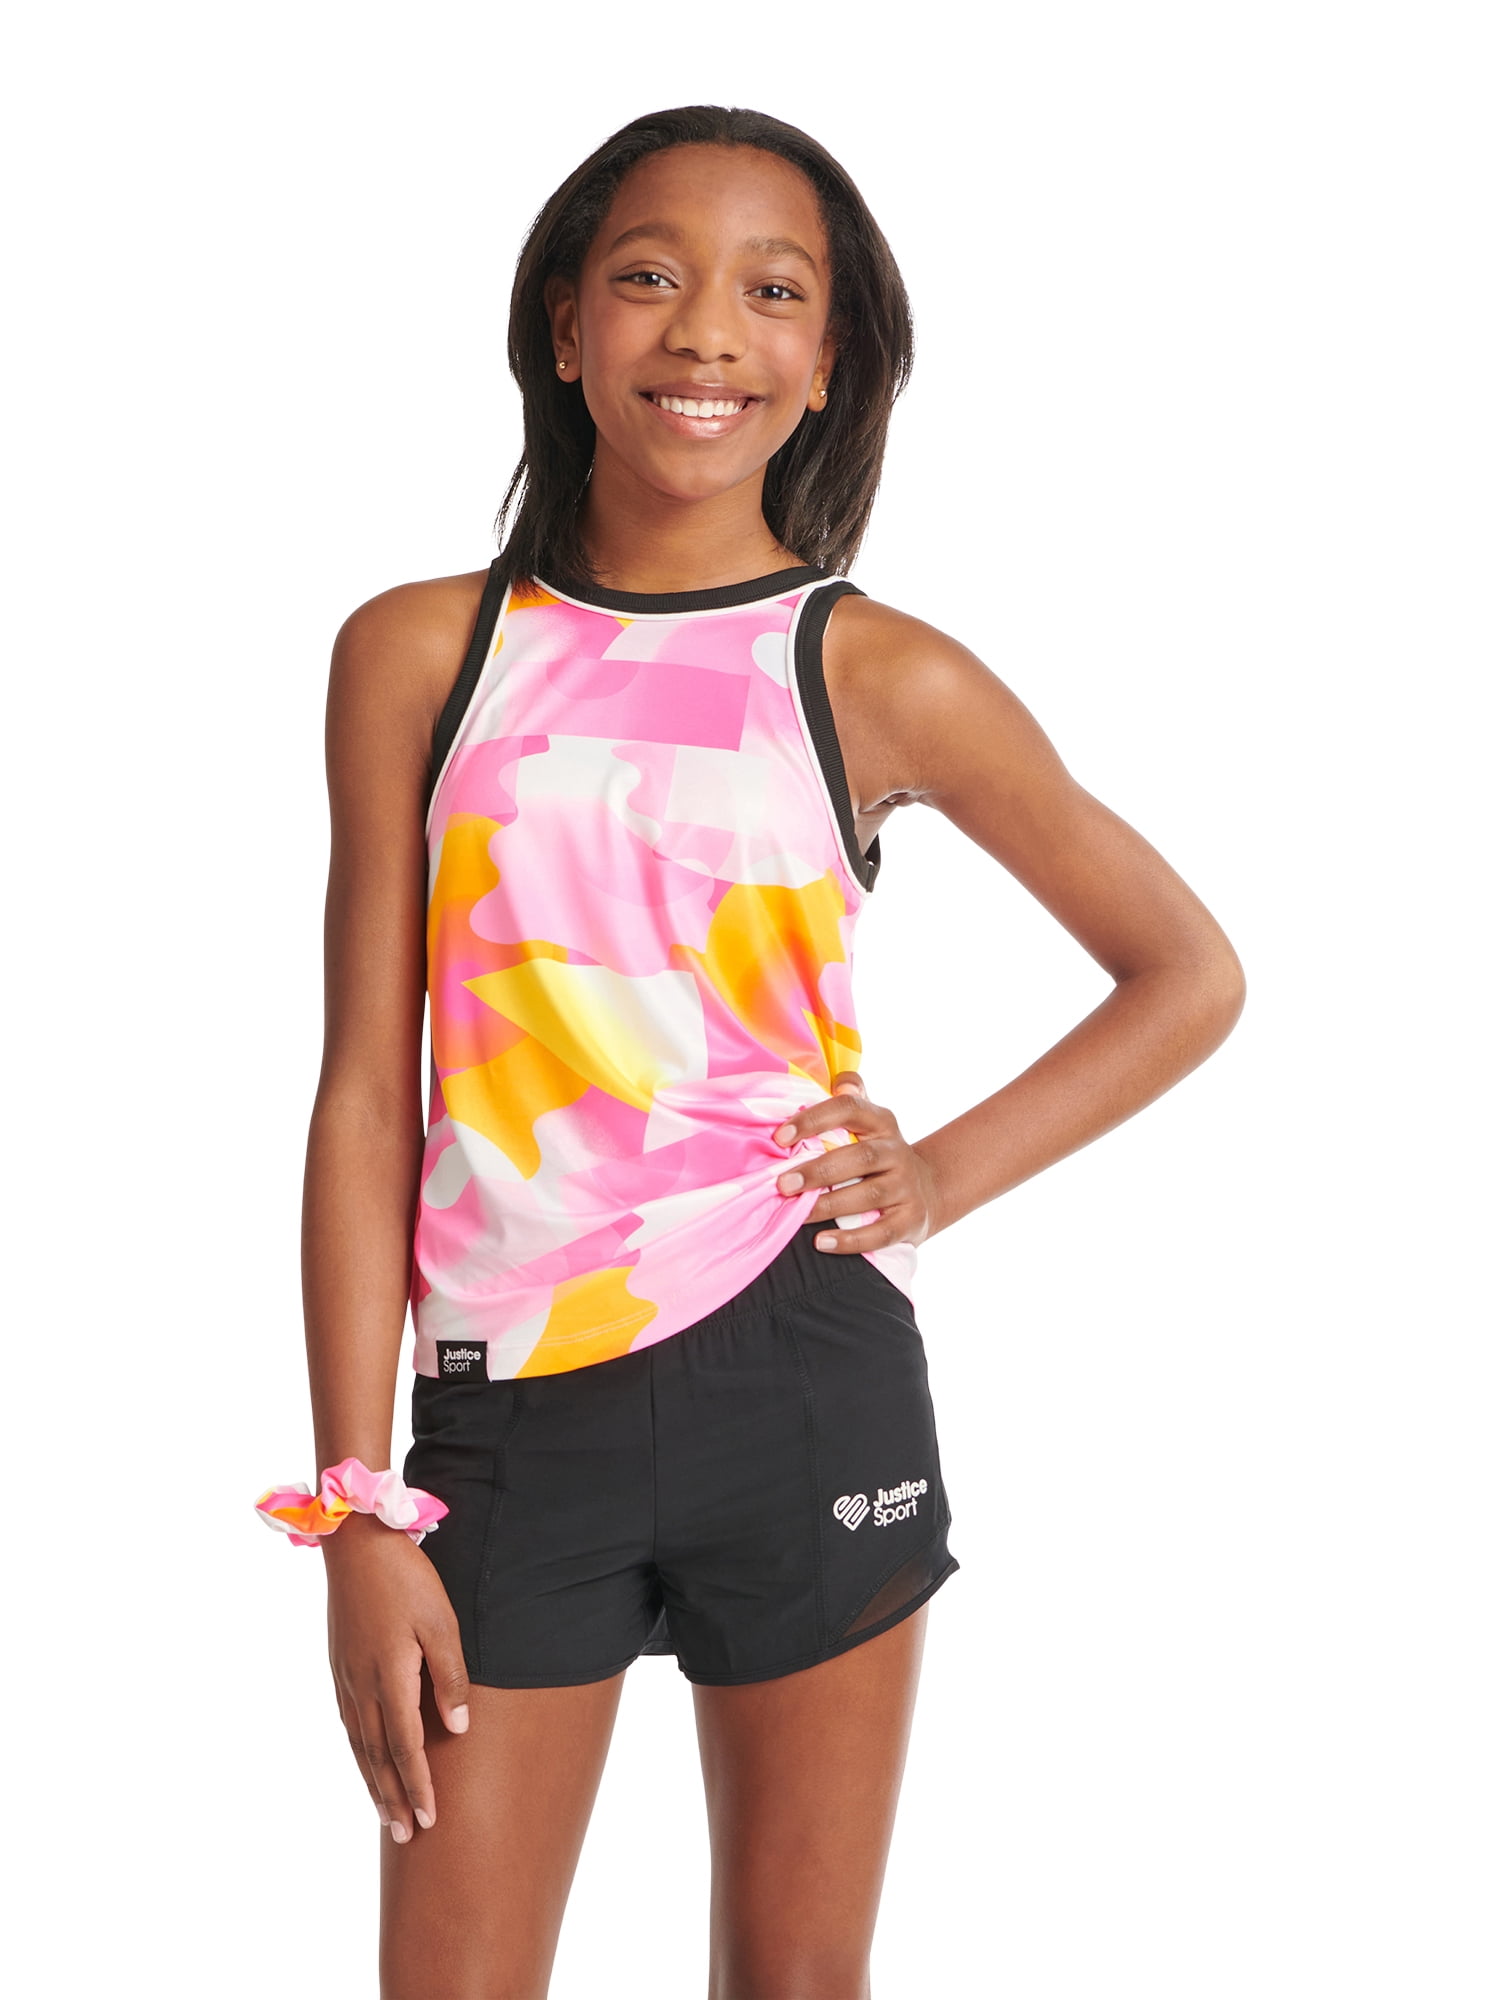 Justice Girl's Everyday Cami Tank Top Set, 3-Pack, Sizes XS-XLP 